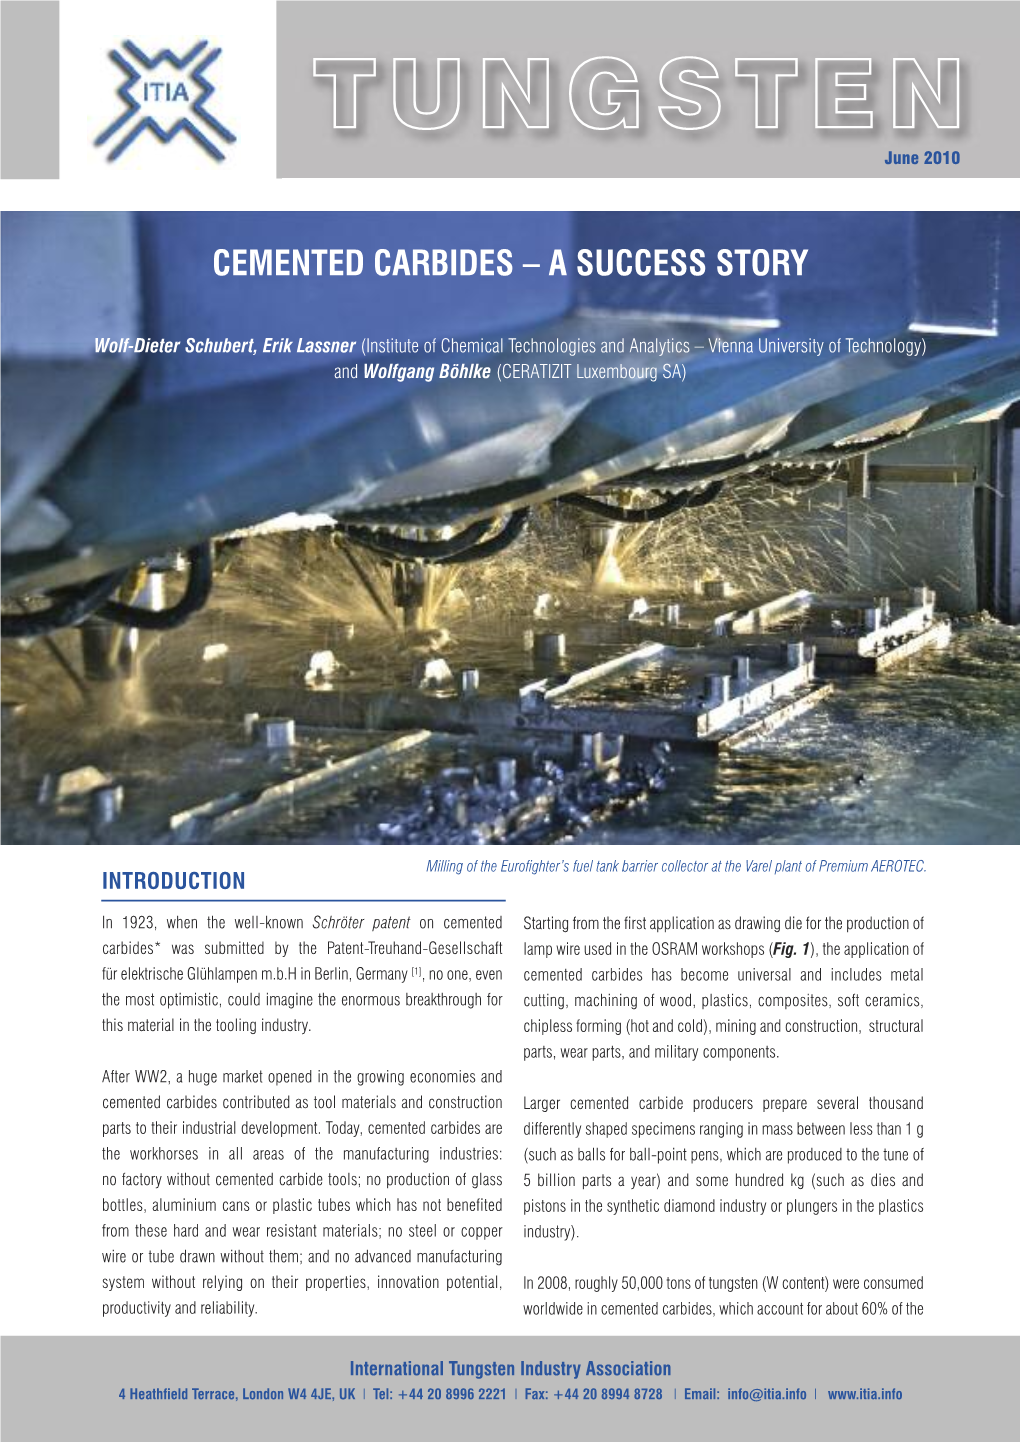 Cemented Carbides – a Success Story